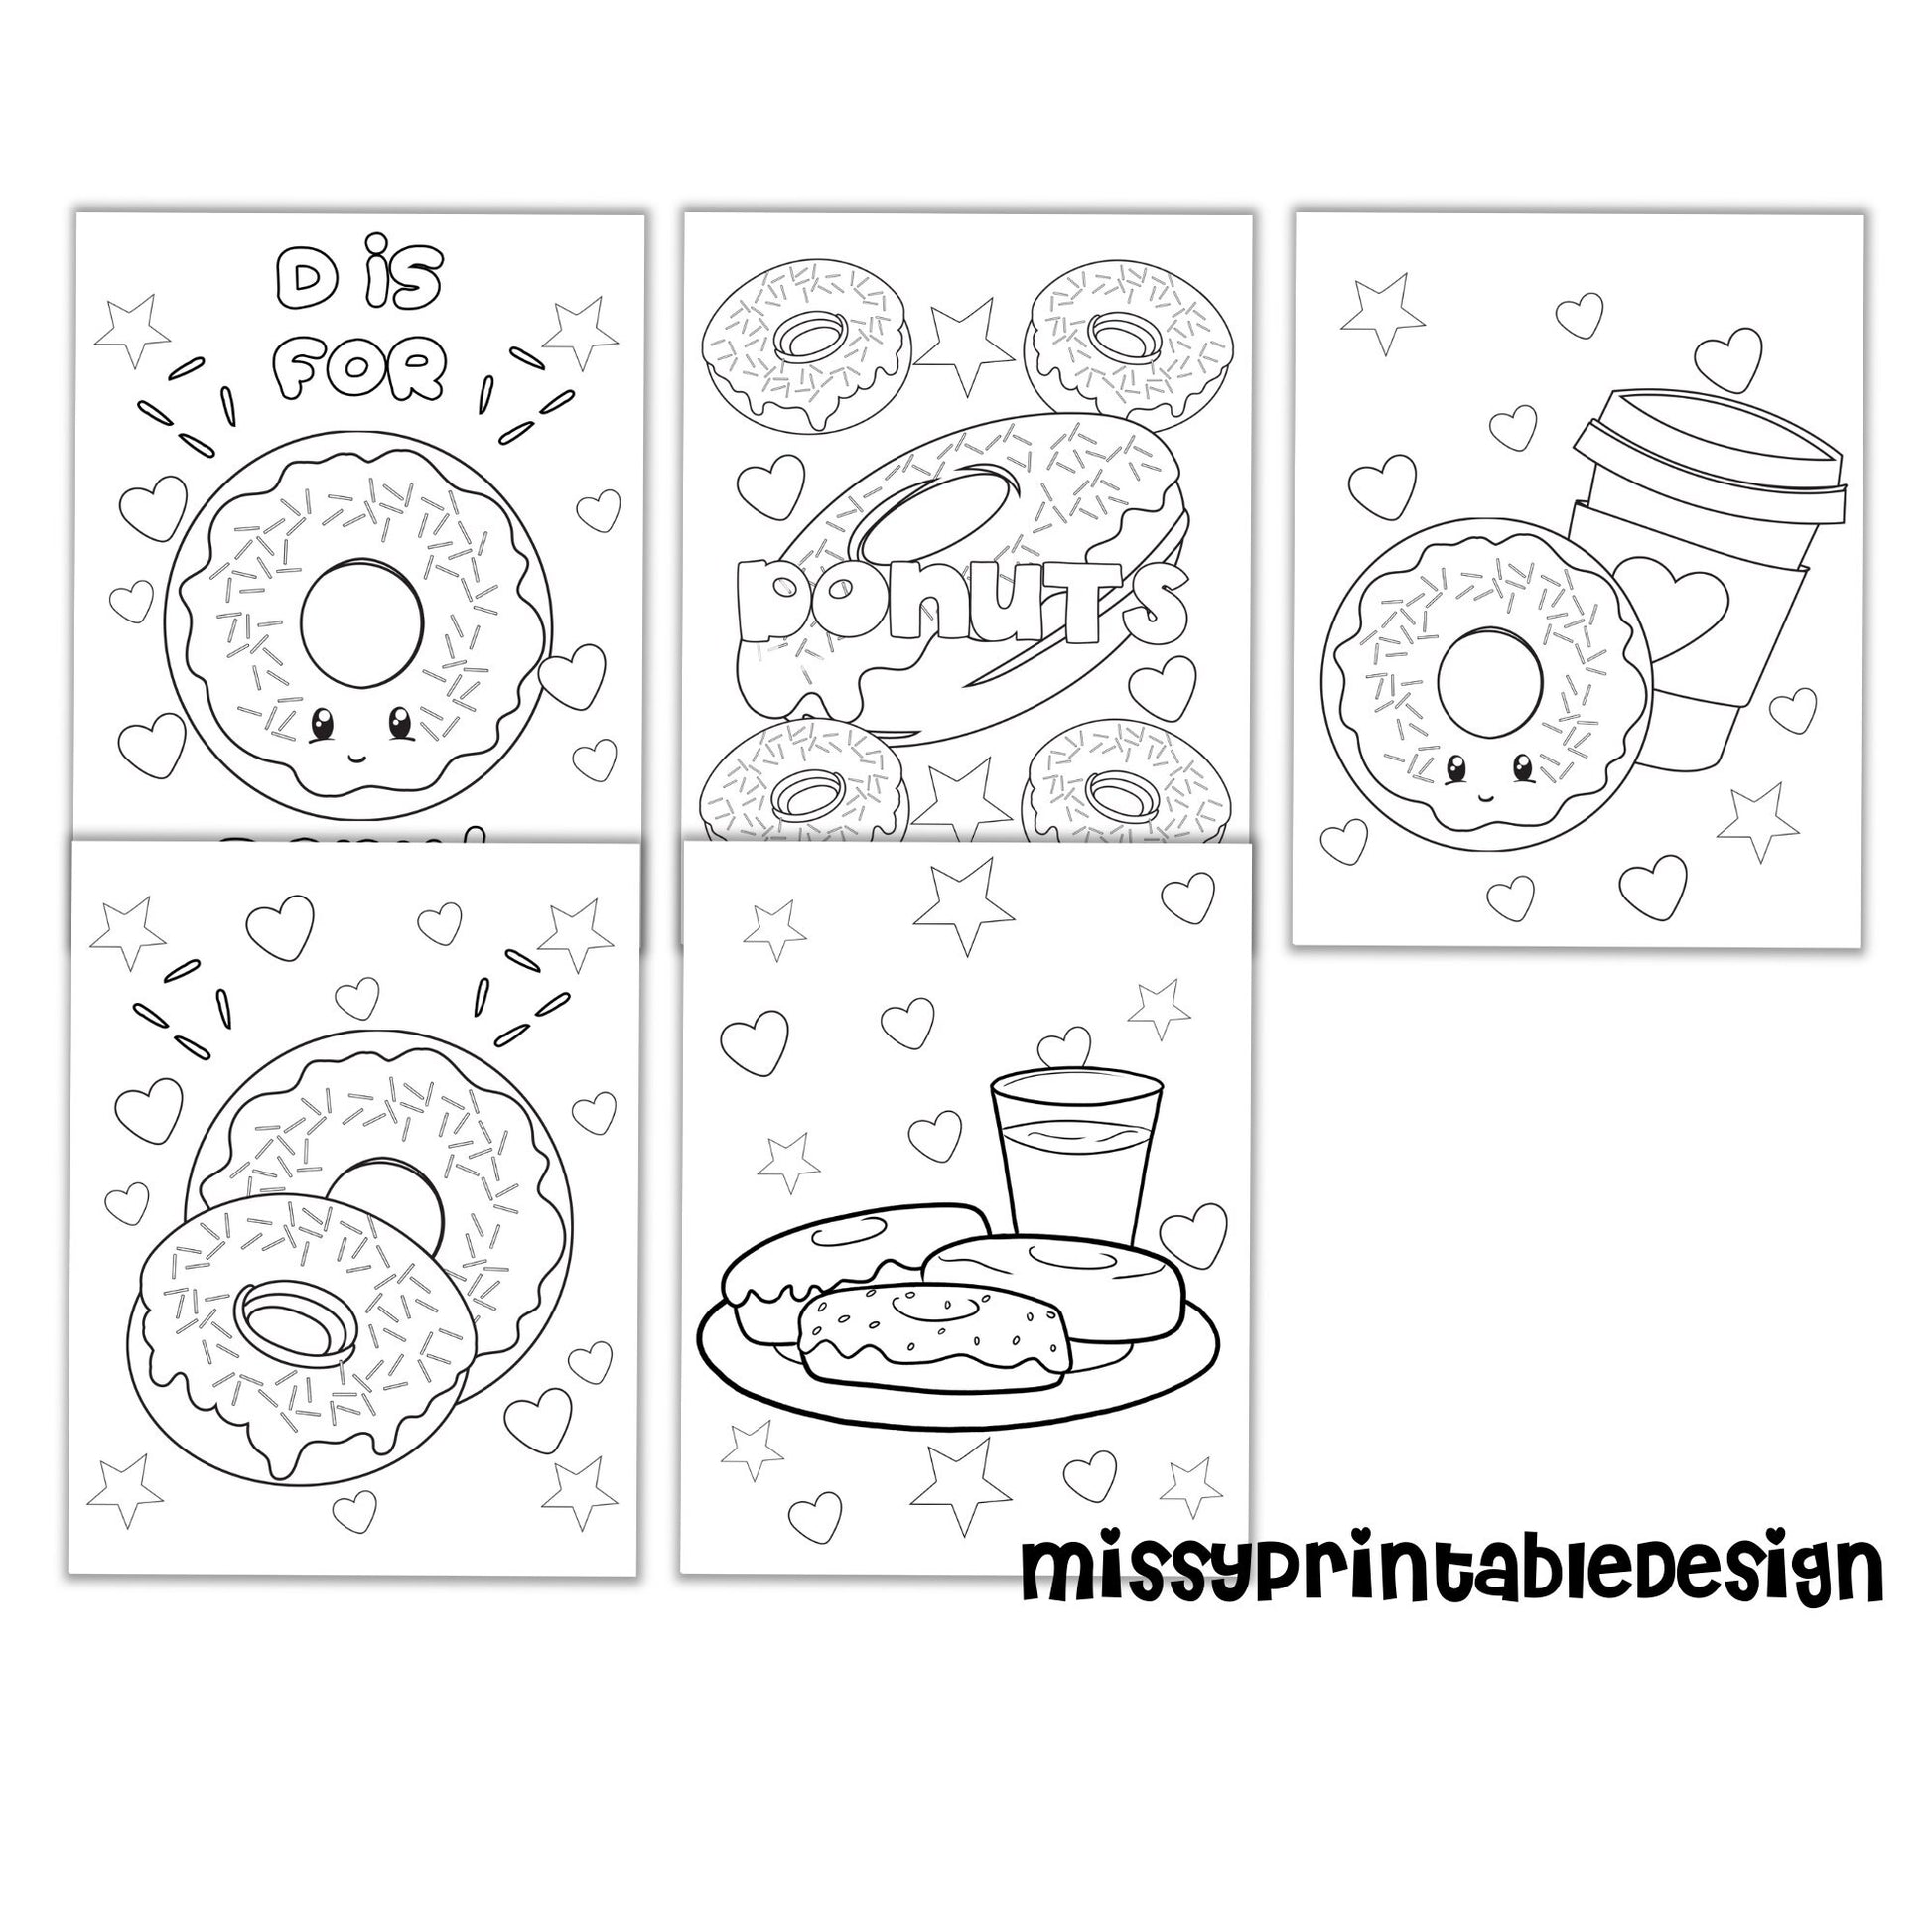 Donut Coloring Pages, Printable Coloring Pages, Donut Birthday Party Activity, Birthday Party, Kids Coloring Pages